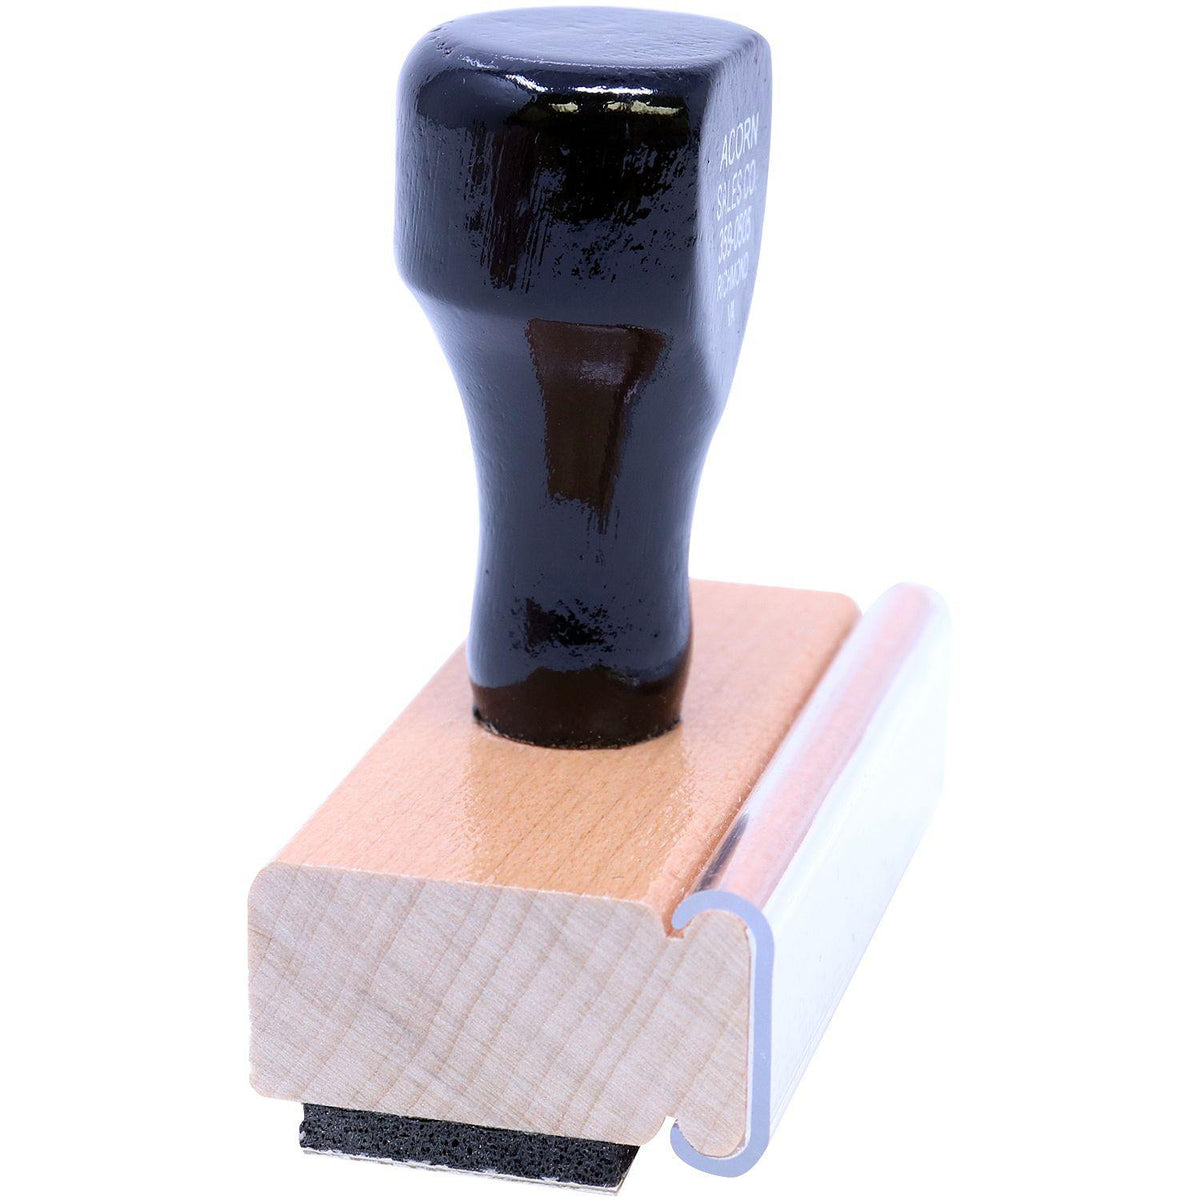 Large Standard Mail A Rubber Stamp - Engineer Seal Stamps - Brand_Acorn, Impression Size_Large, Stamp Type_Regular Stamp, Type of Use_Postal &amp; Mailing